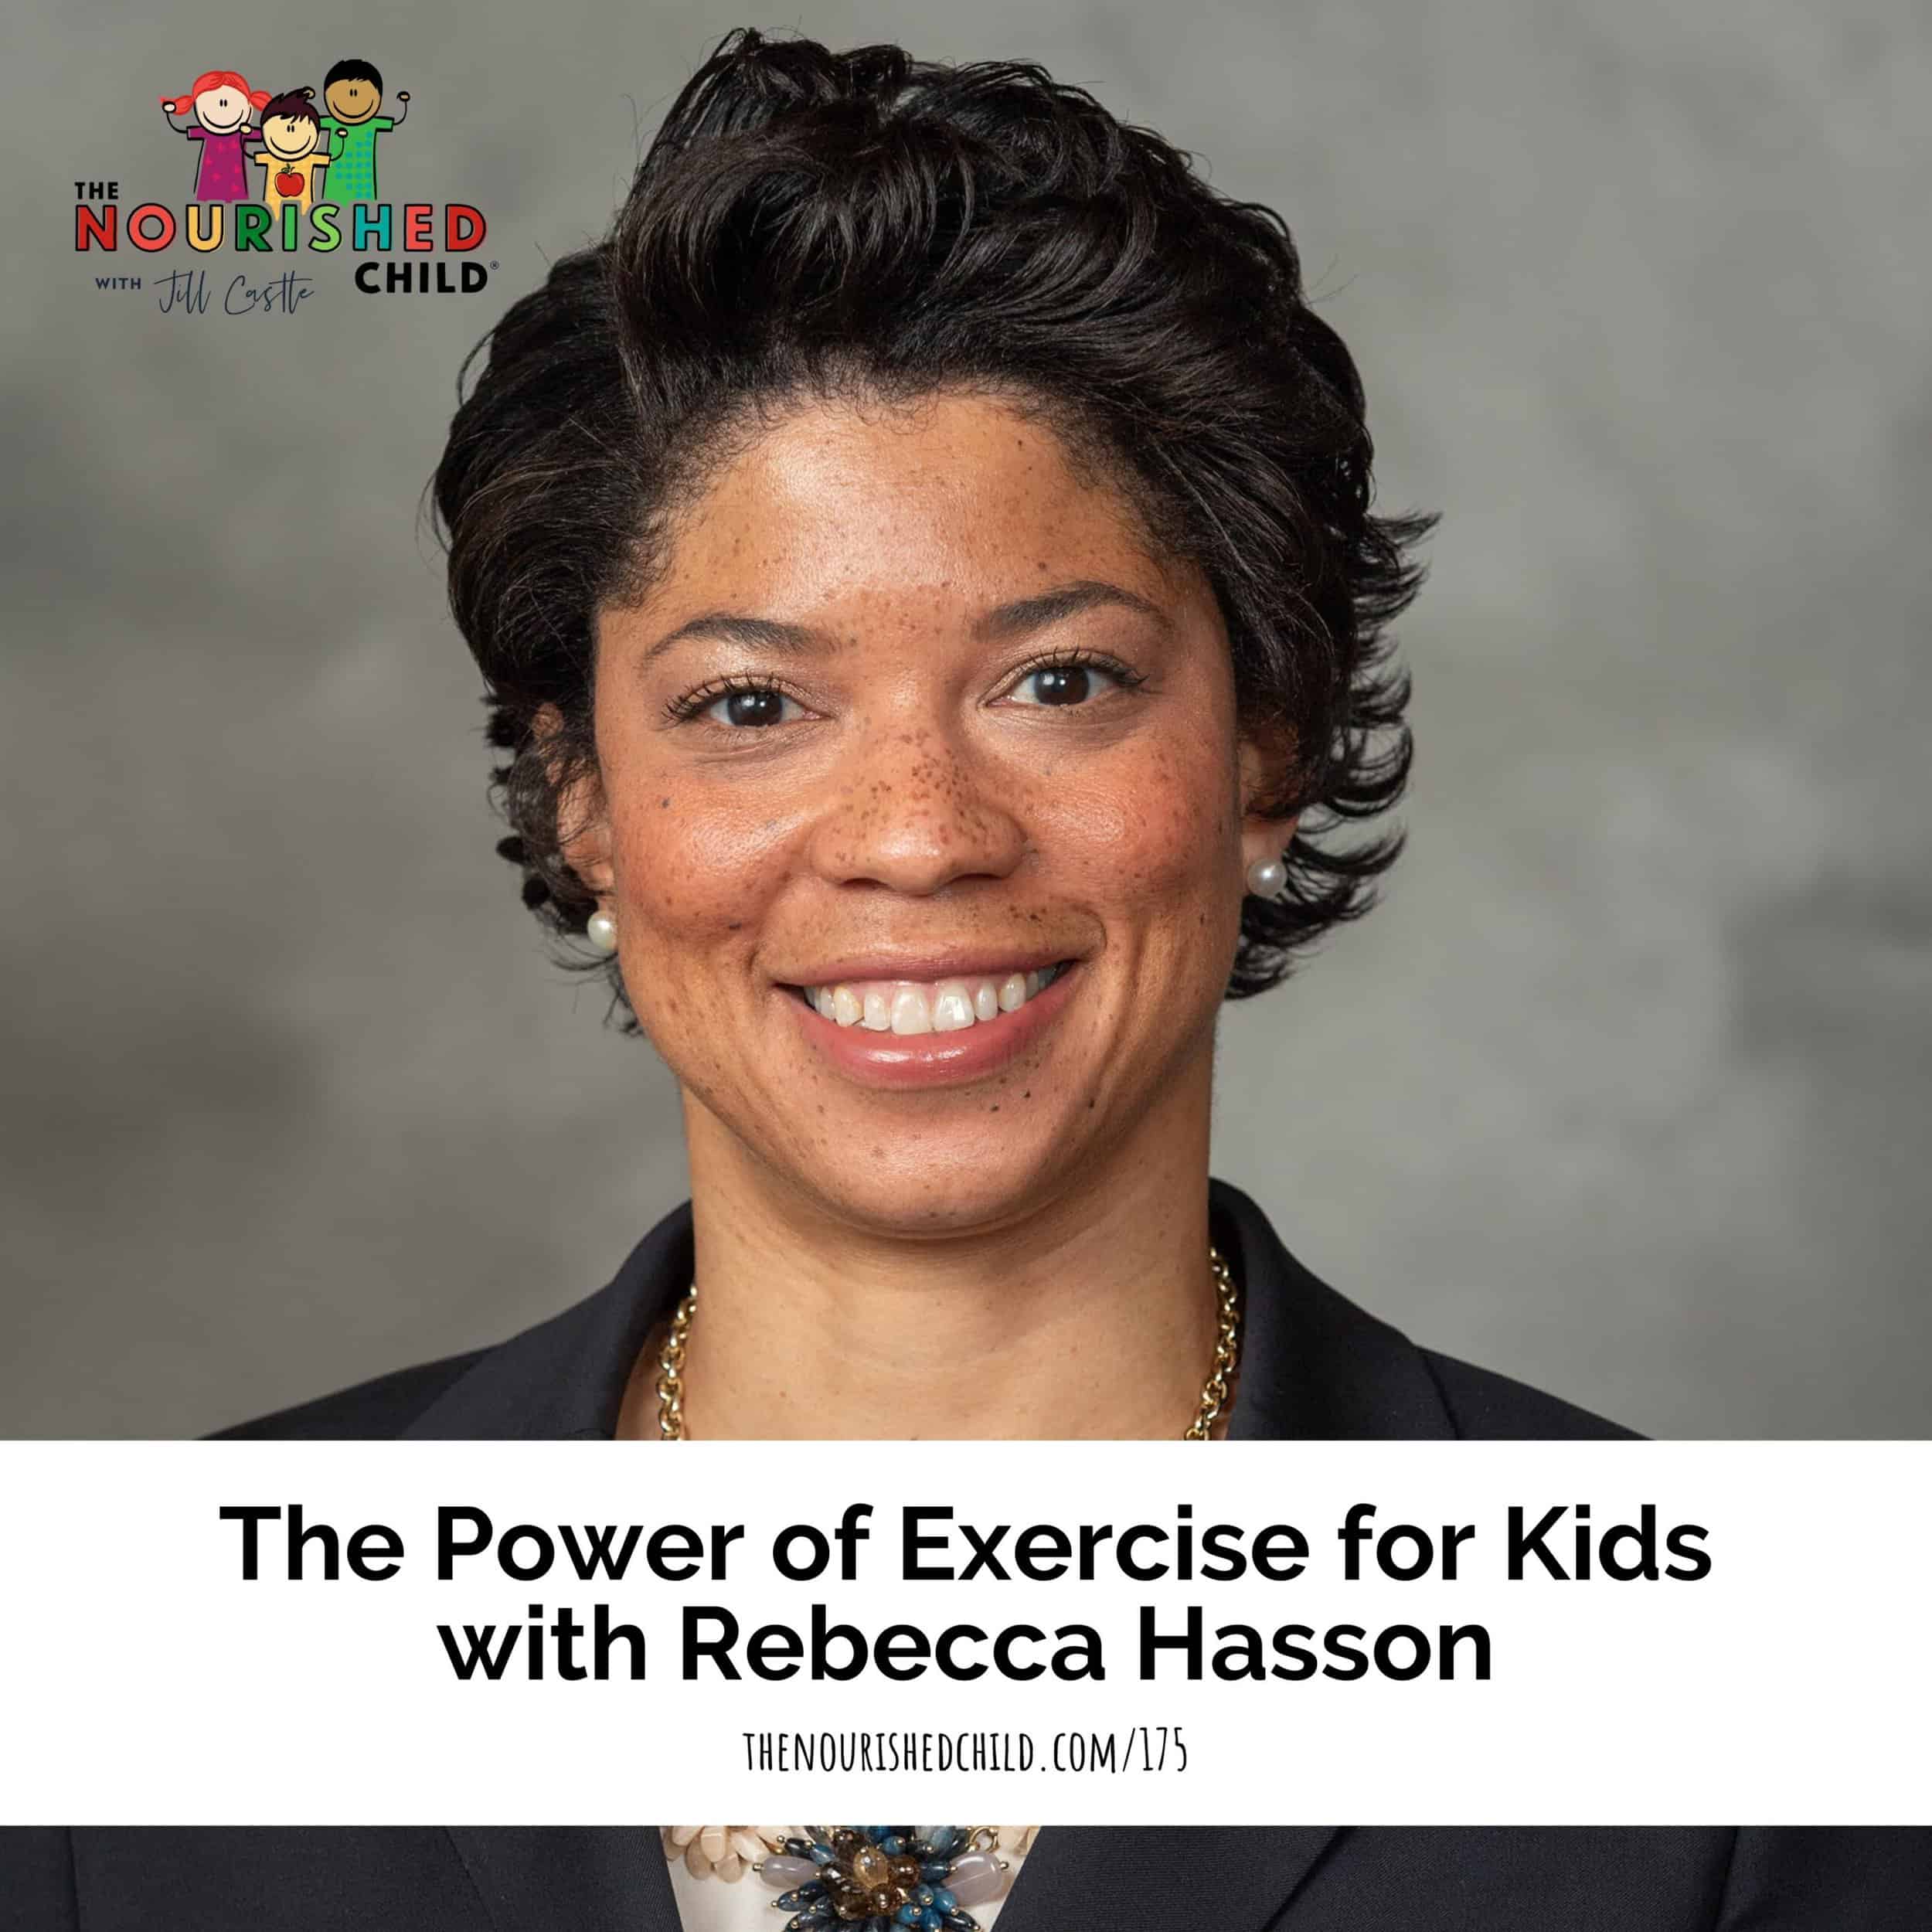 rebecca hasson on the nourished child podcast